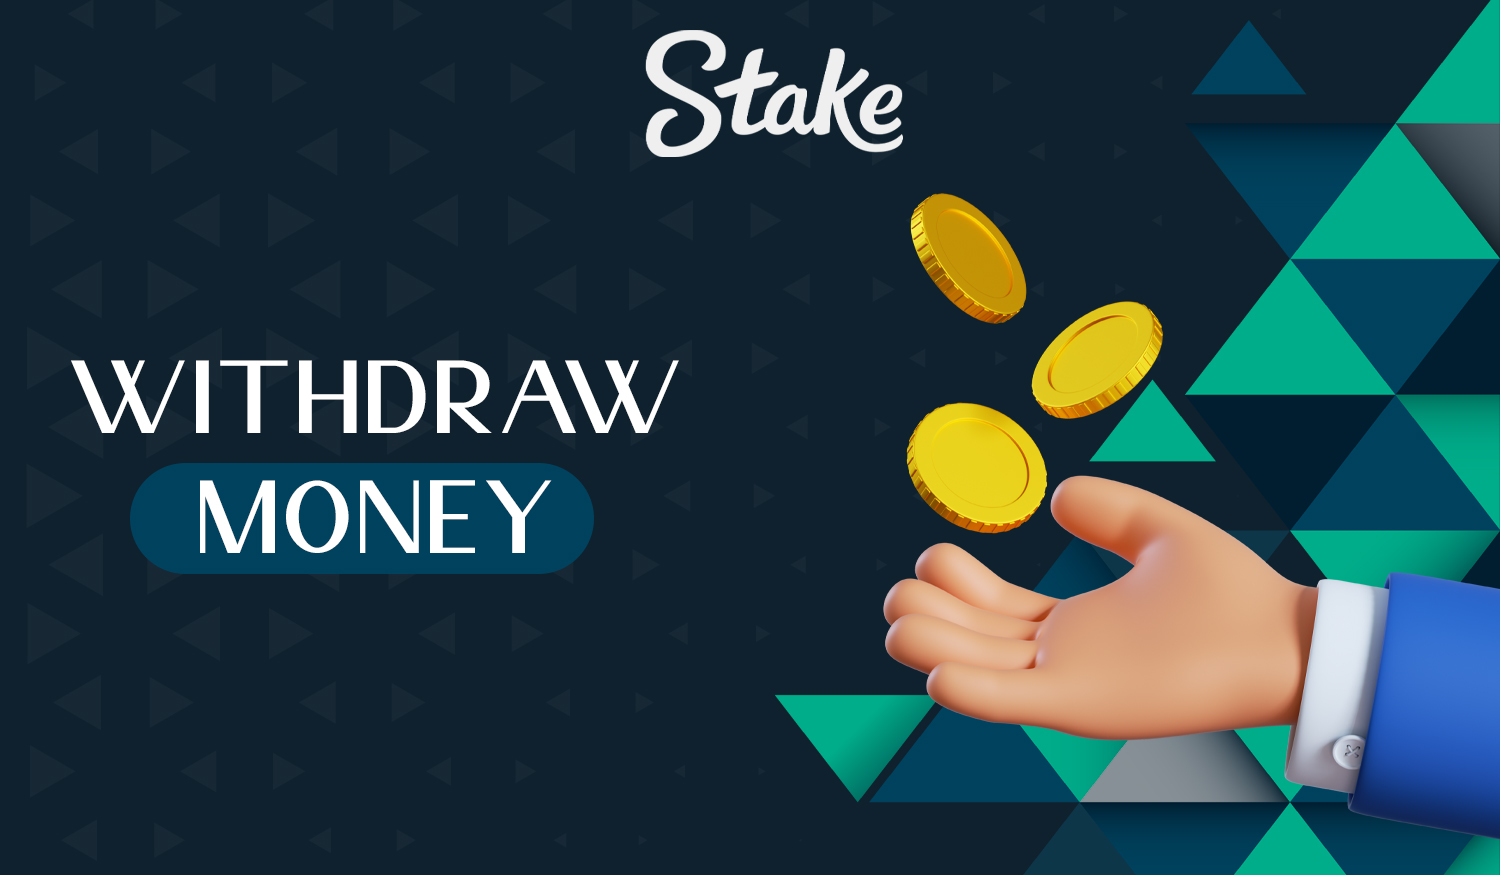 Step by step instructions on how to withdraw funds from Stake